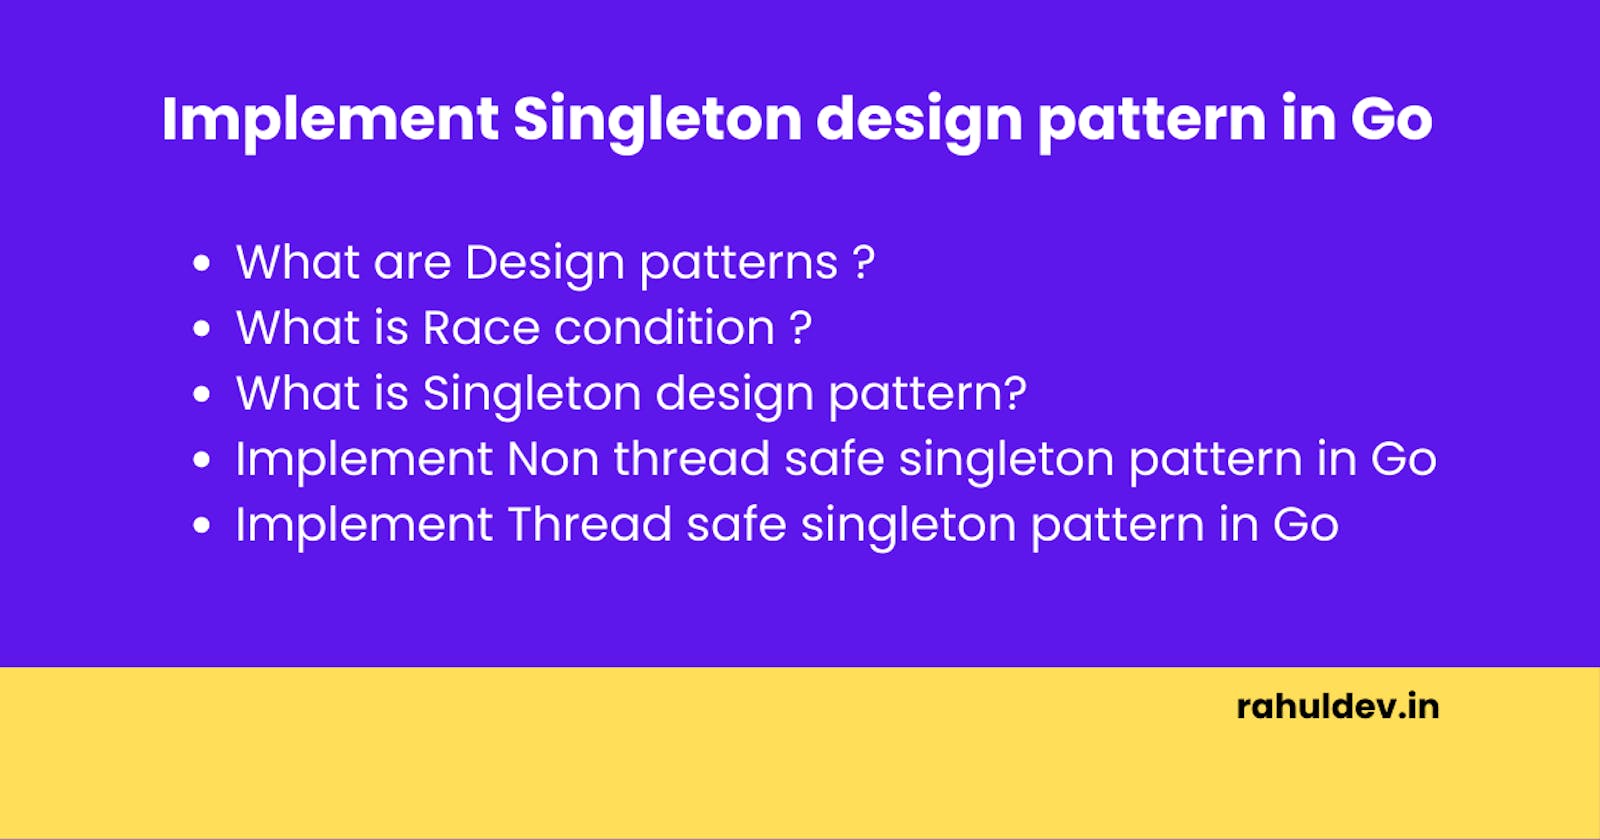 How to implement Singleton design pattern in Go ? 🔥